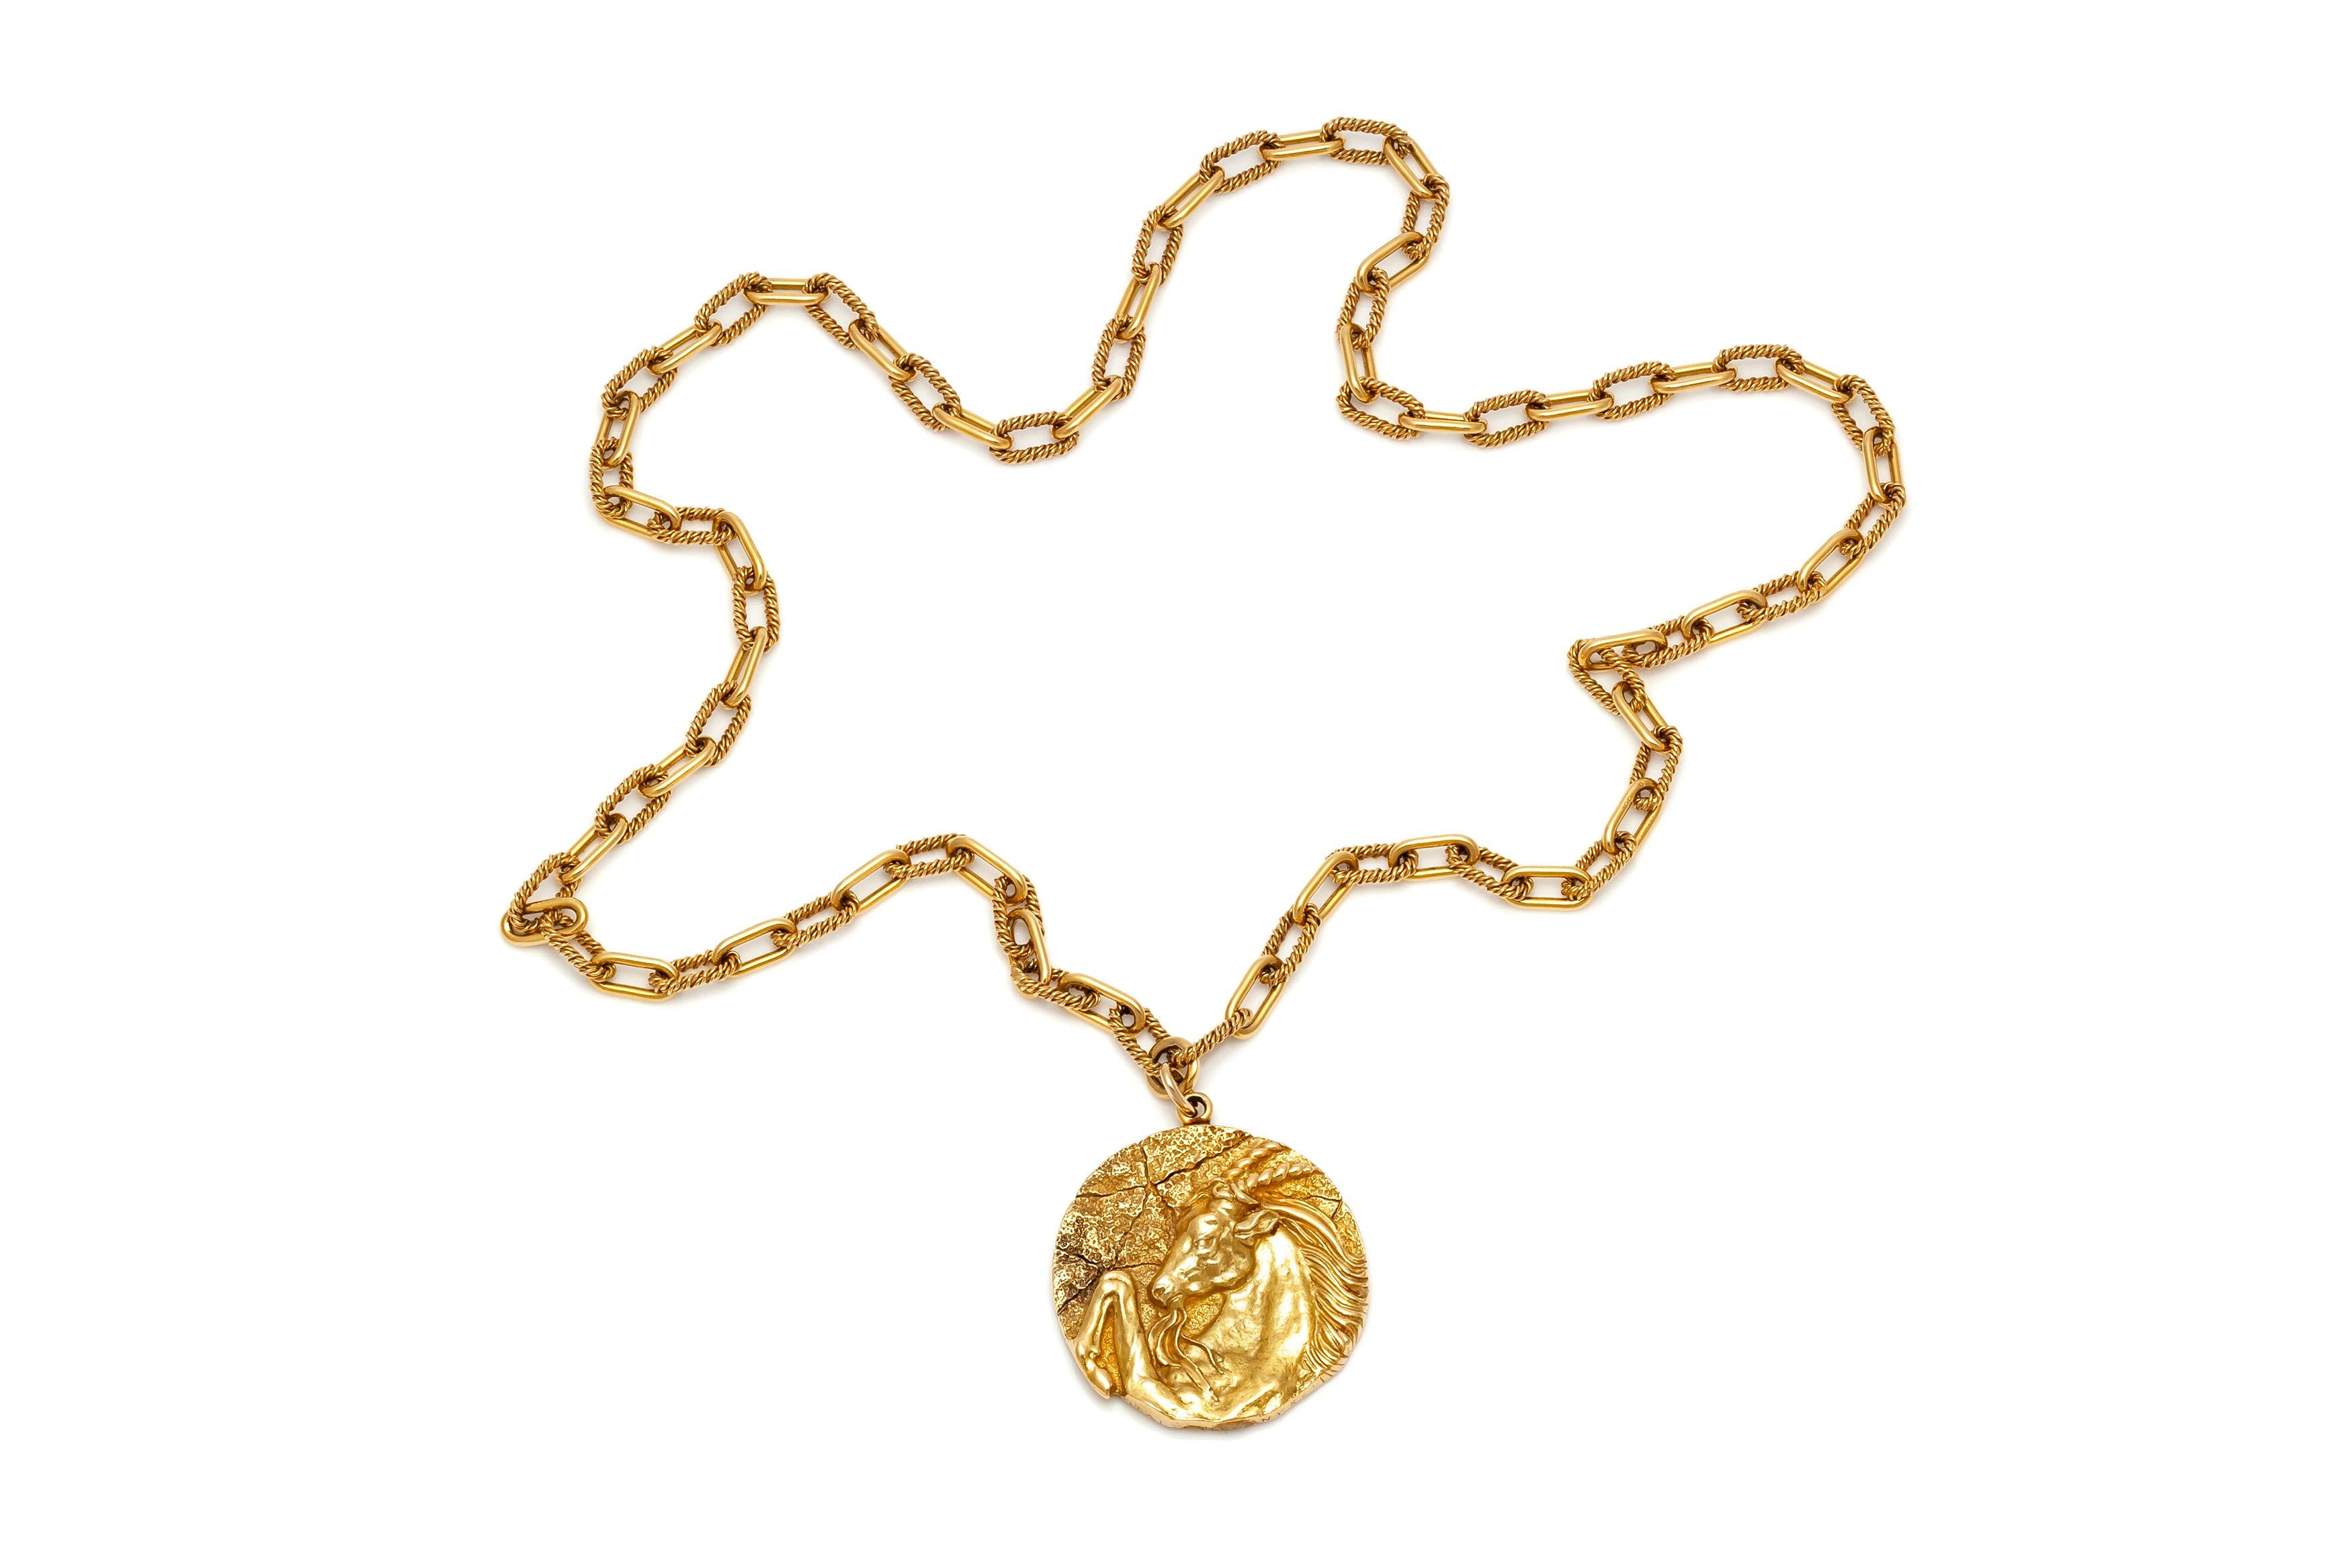 Tiffany & Co. necklace, finely crafted in 18k yellow gold with zodiac pendant. Circa 1970's.